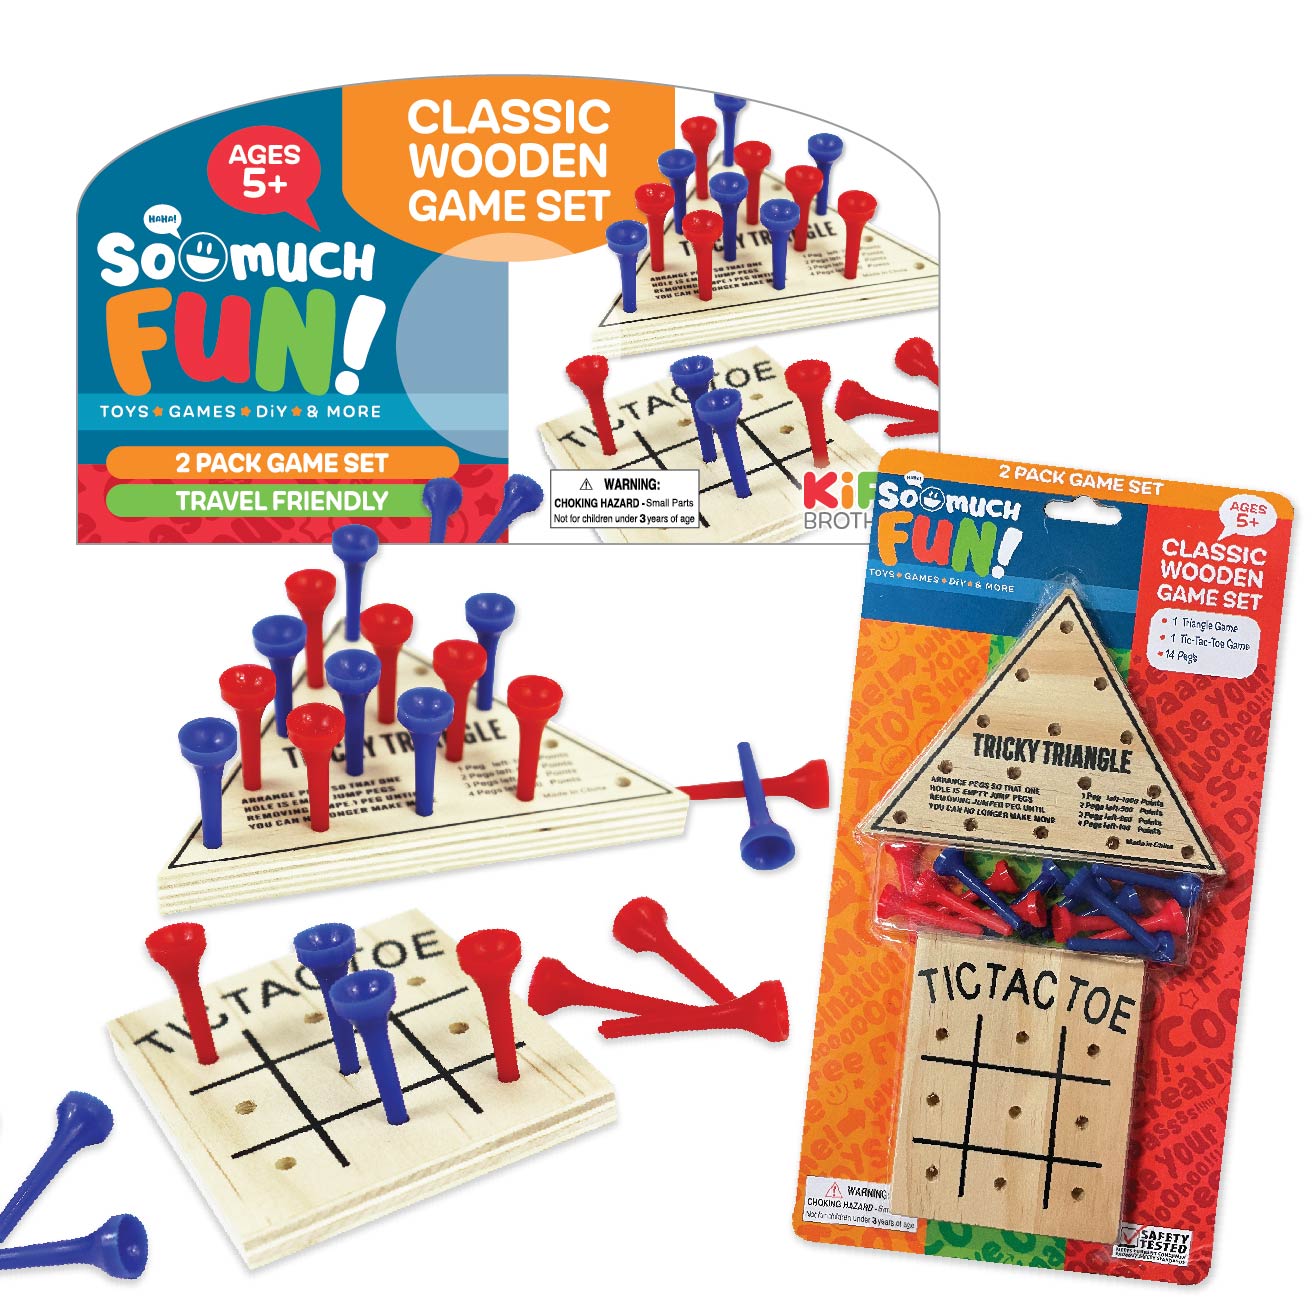 ITEM NUMBER 022943L CLASSIC WOODEN 2 PACKPEG GAMES - STORE SURPLUS NO DISPLAY 12 PIECES PER PACK